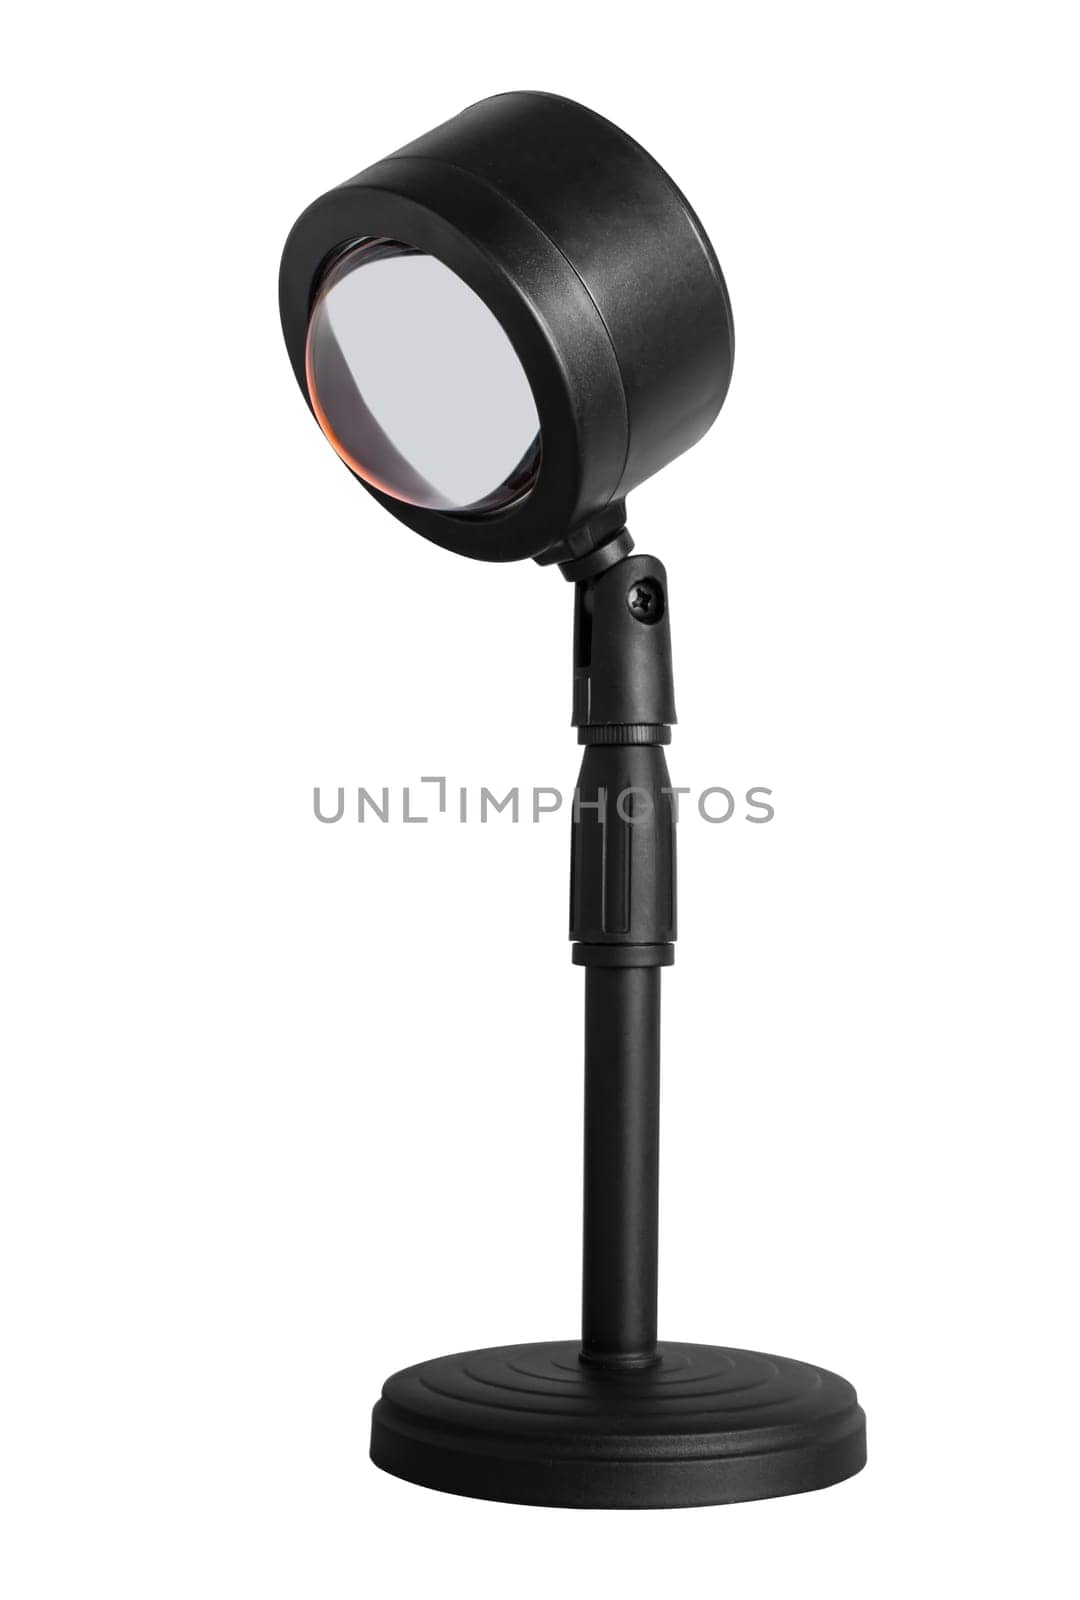 Lamp illuminator on a tripod on a white background in insulation